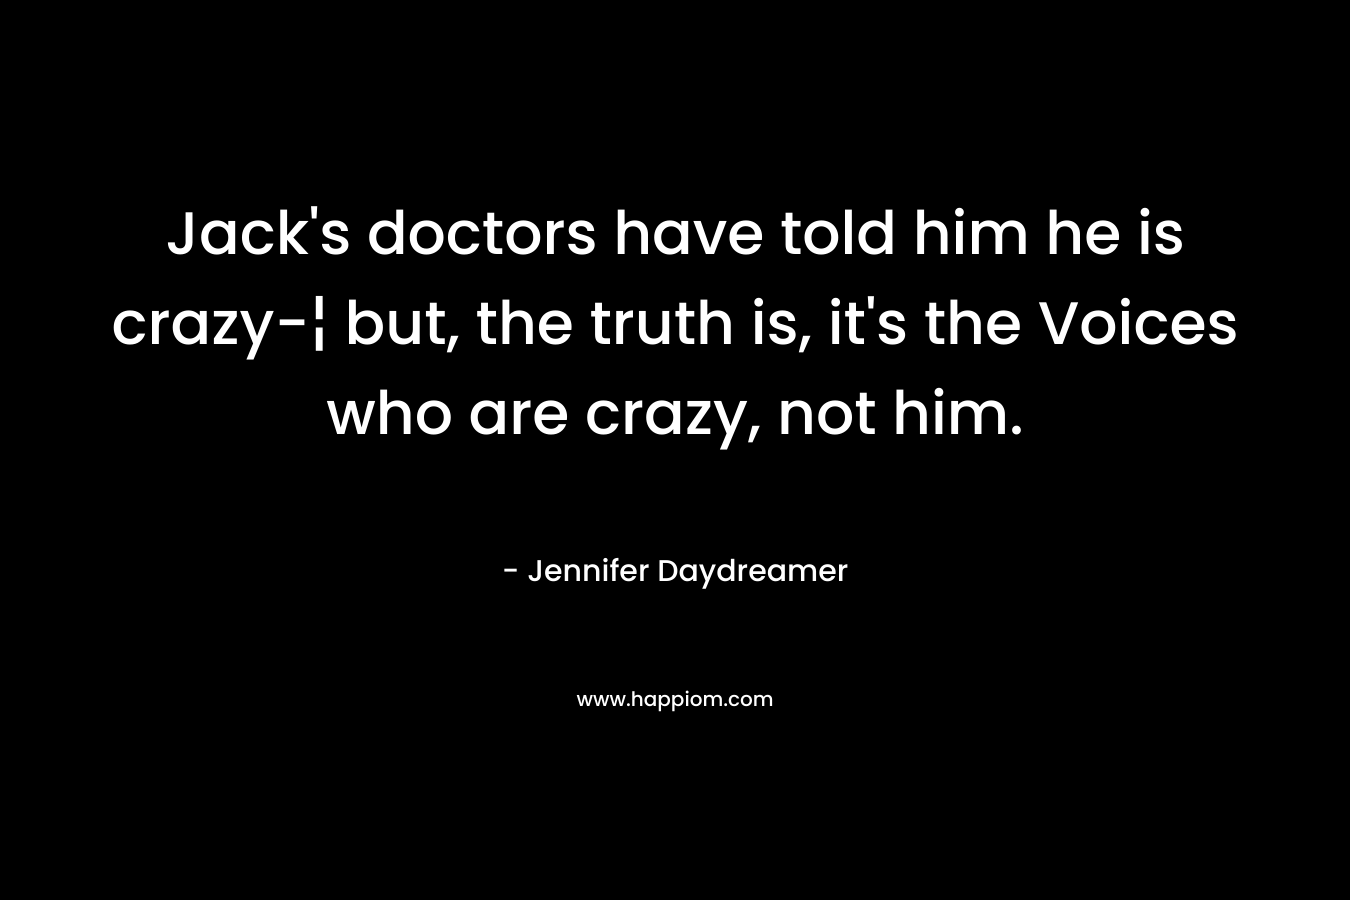 Jack’s doctors have told him he is crazy-¦ but, the truth is, it’s the Voices who are crazy, not him. – Jennifer Daydreamer